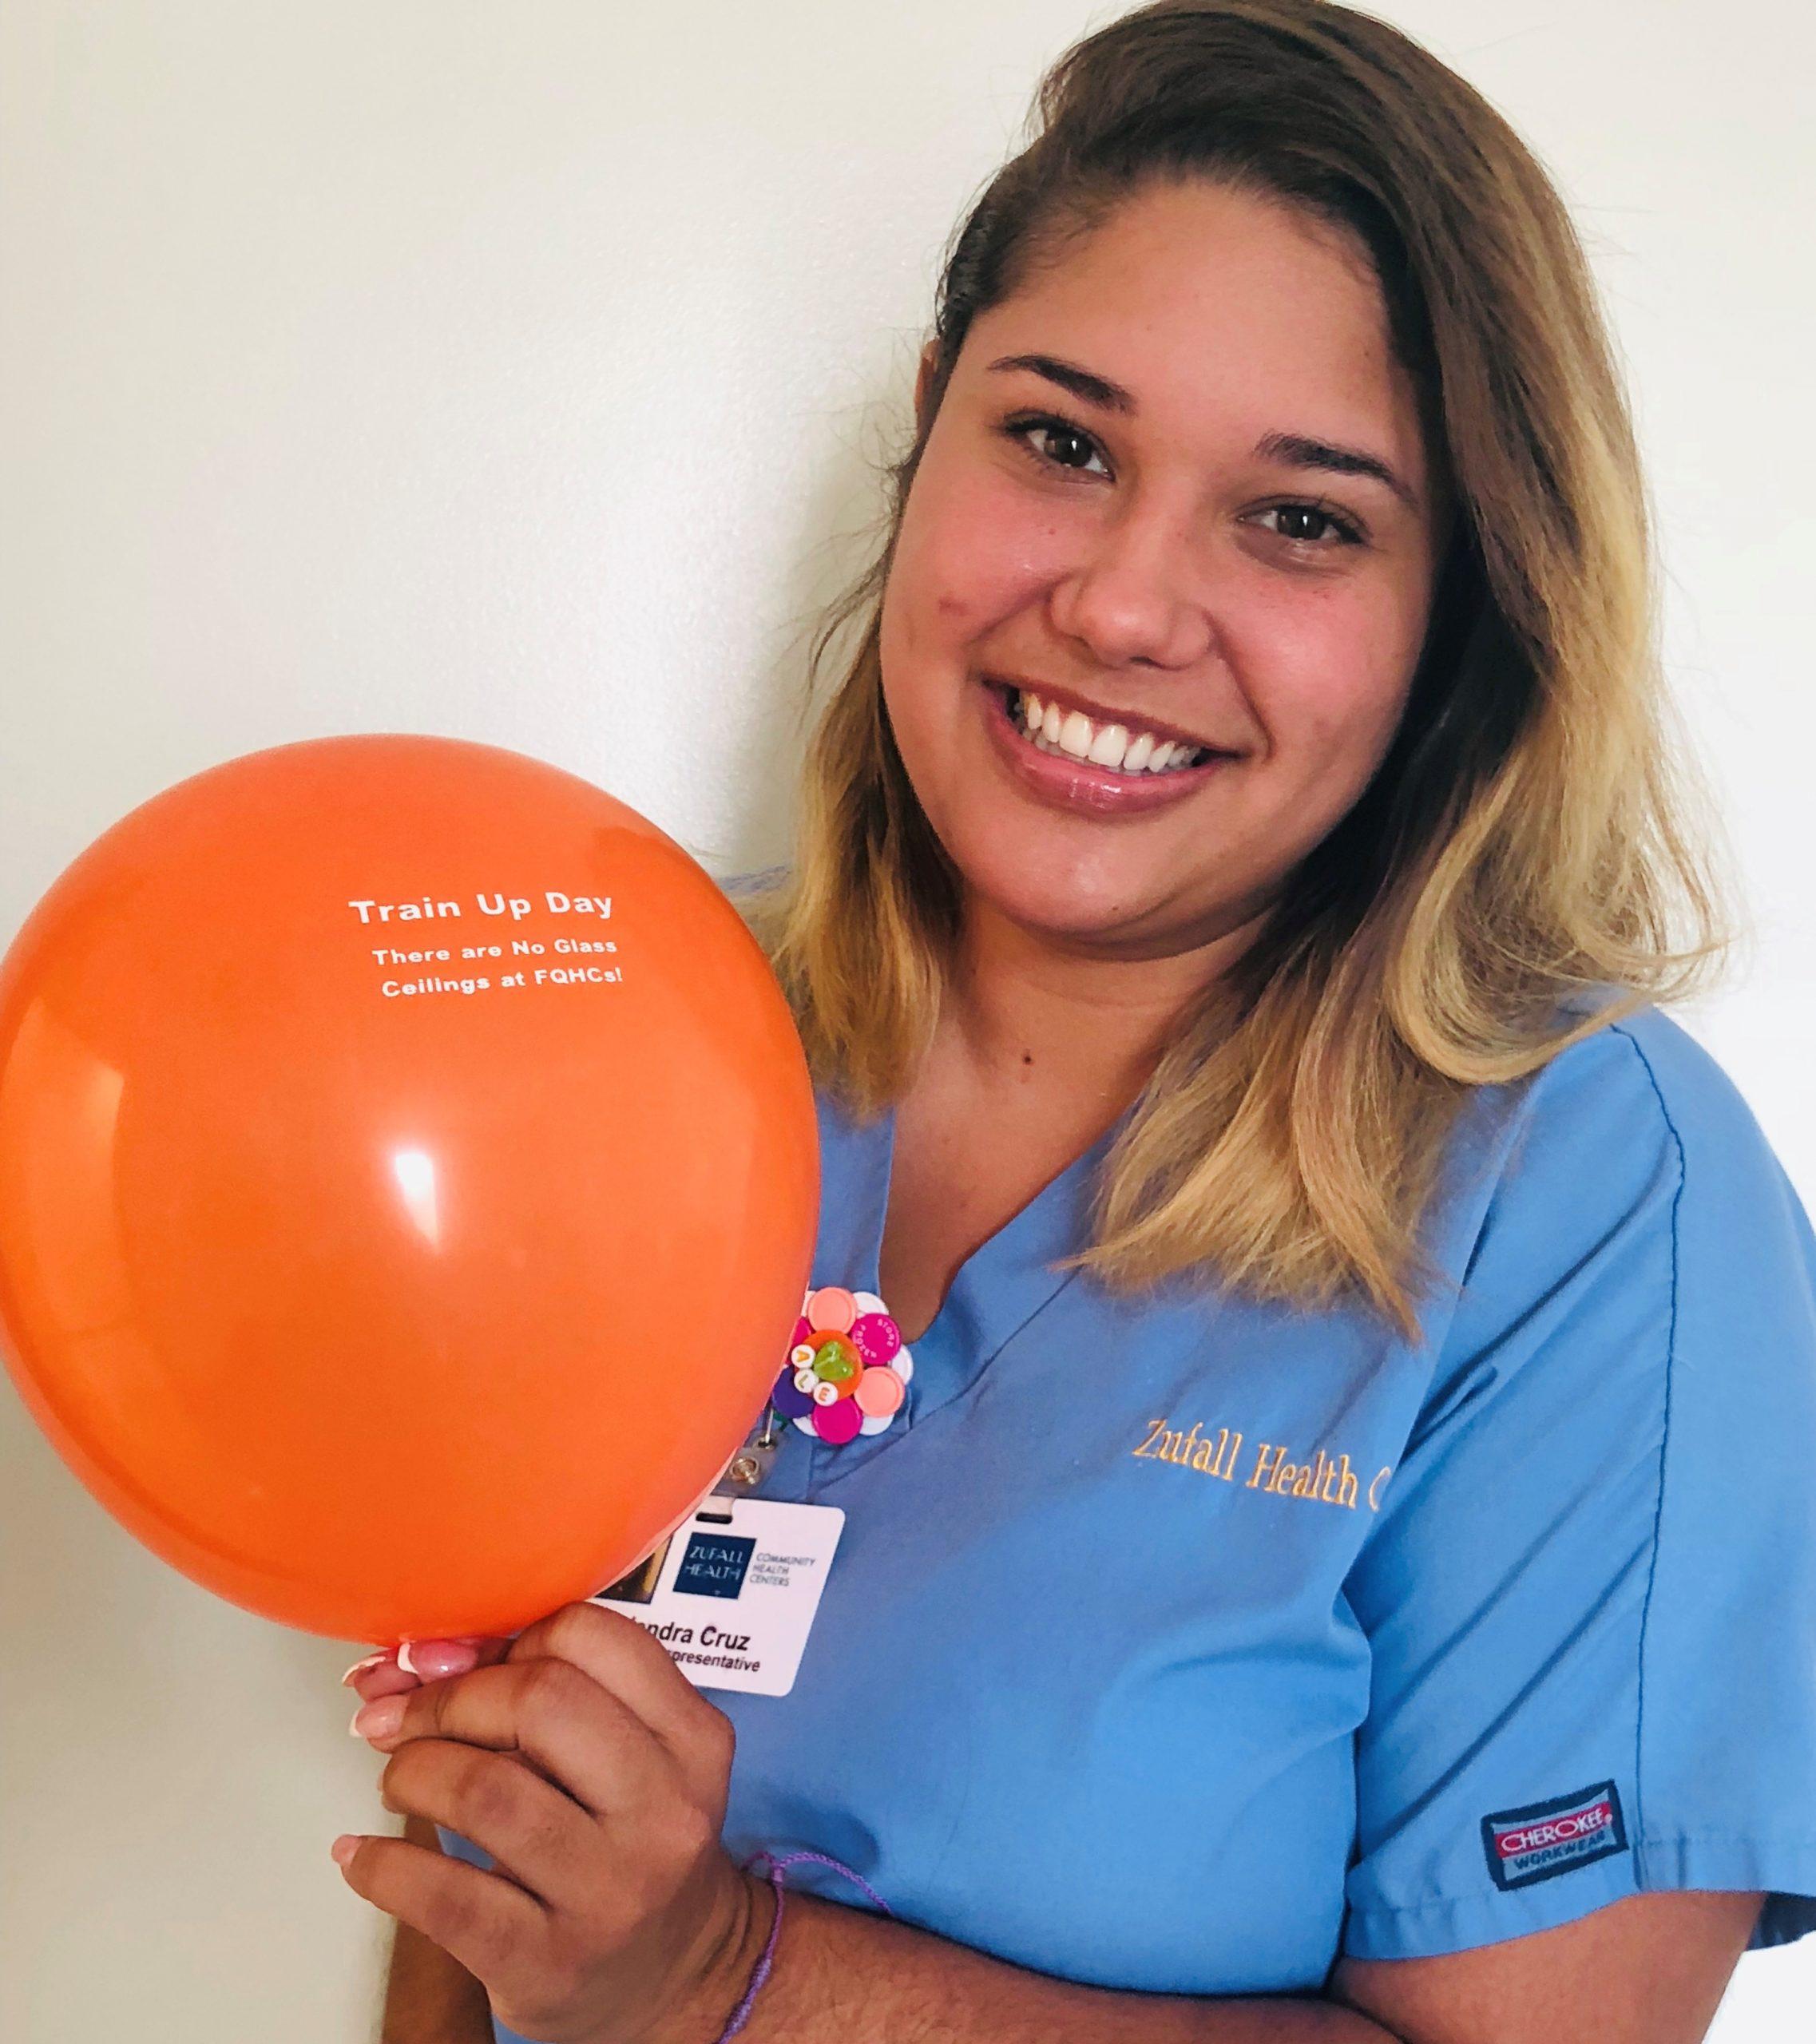 Patient Representative Holding Train Up Day Balloon